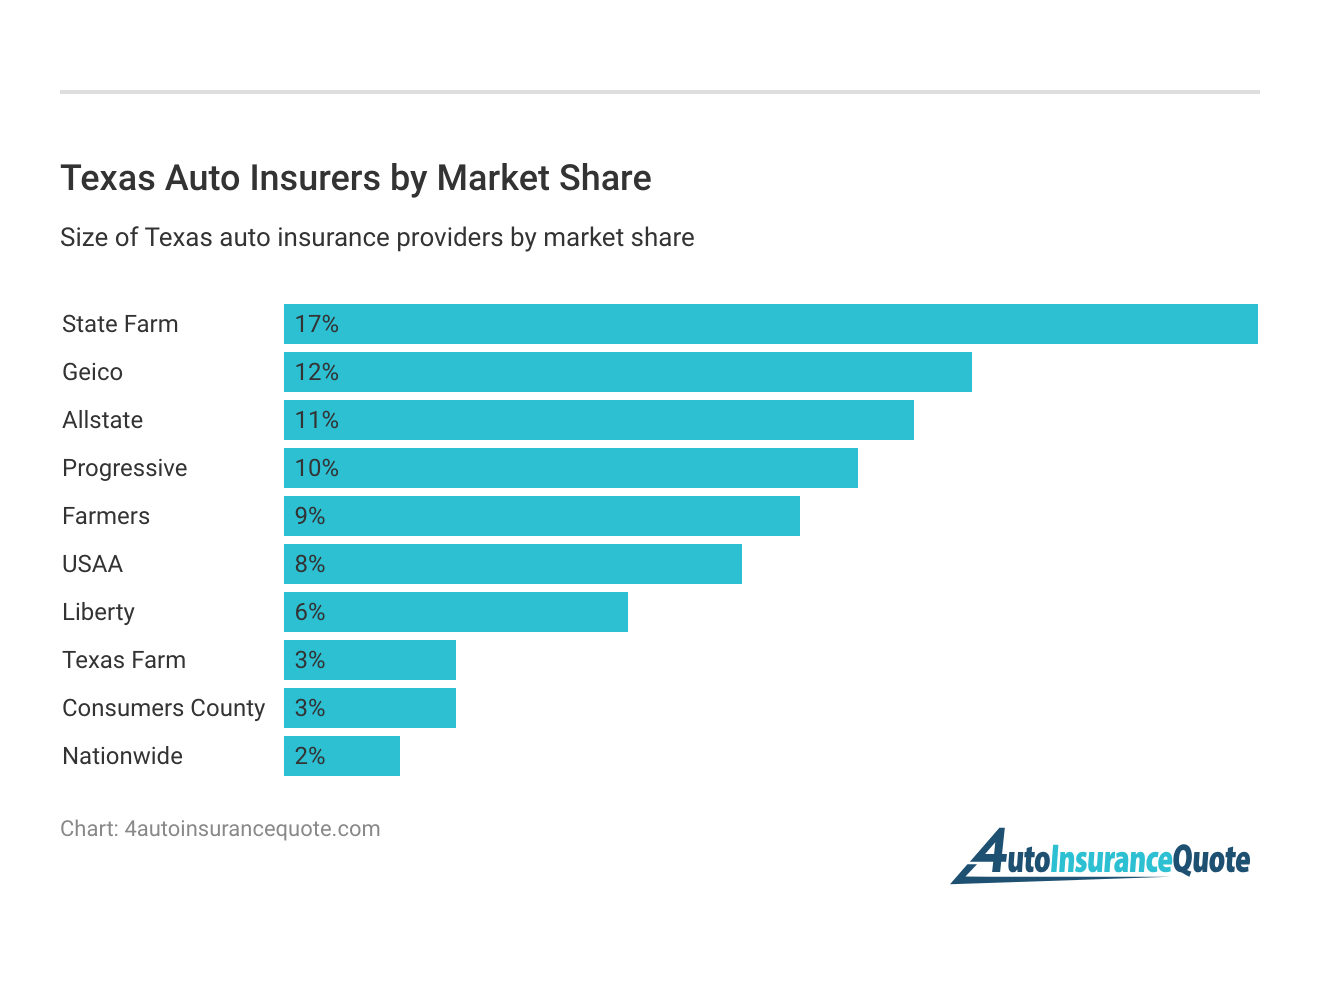 <h3>Texas Auto Insurers by Market Share</h3>